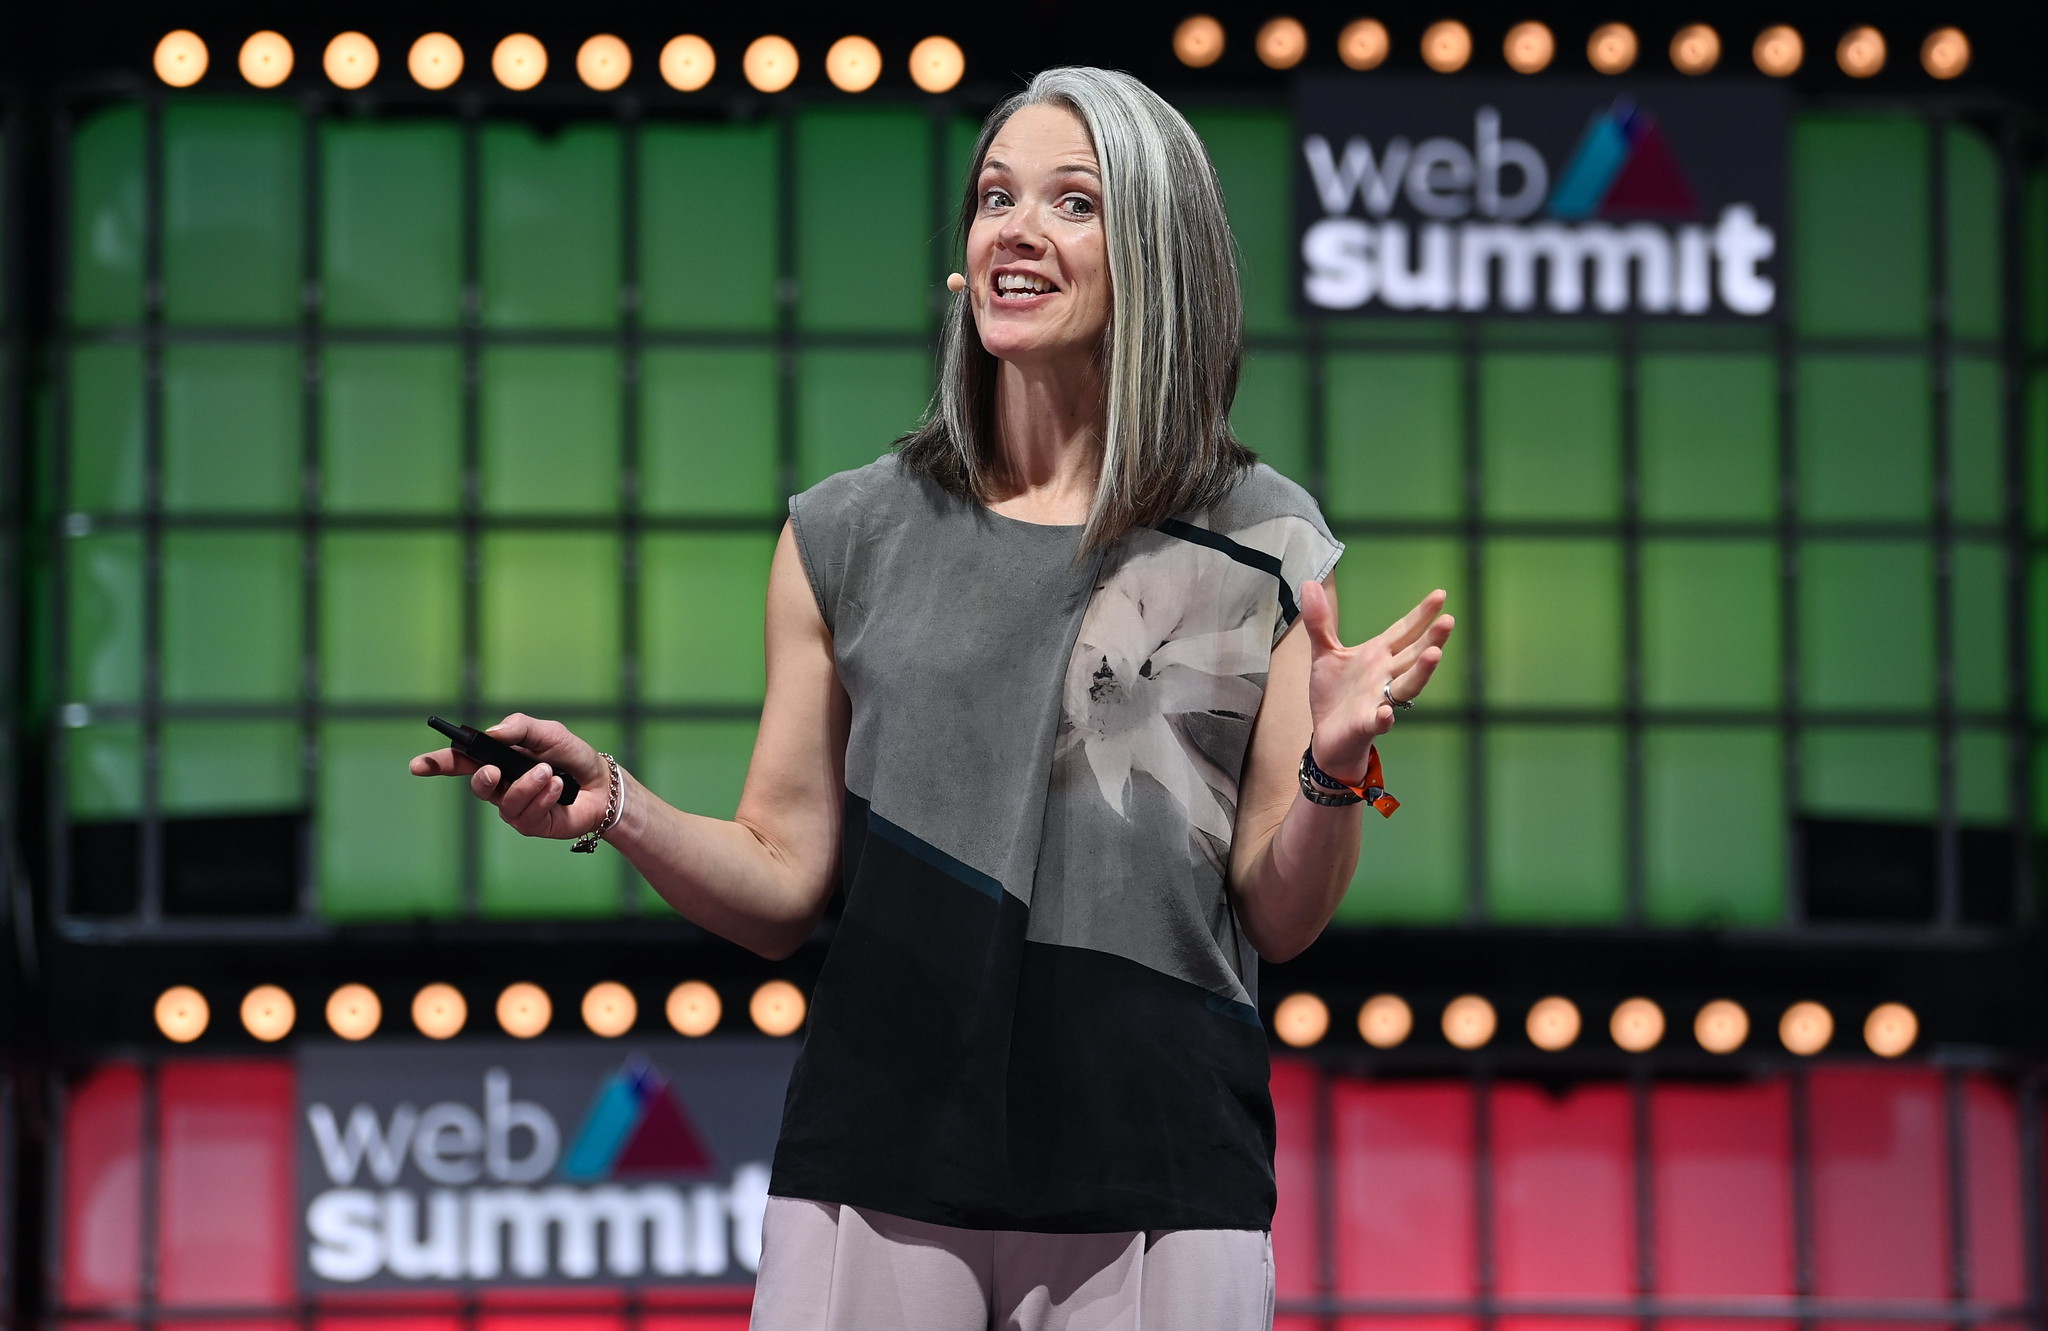 Photograph of Alison Darcy, founder and president of Woebot Health, speaking on stage at Web Summit. Alison is gesturing with hands and appears to be holding a remote. Alison is wearing an on-ear microphone and appears to be speaking. There are two Web Summit logos visible in the background.